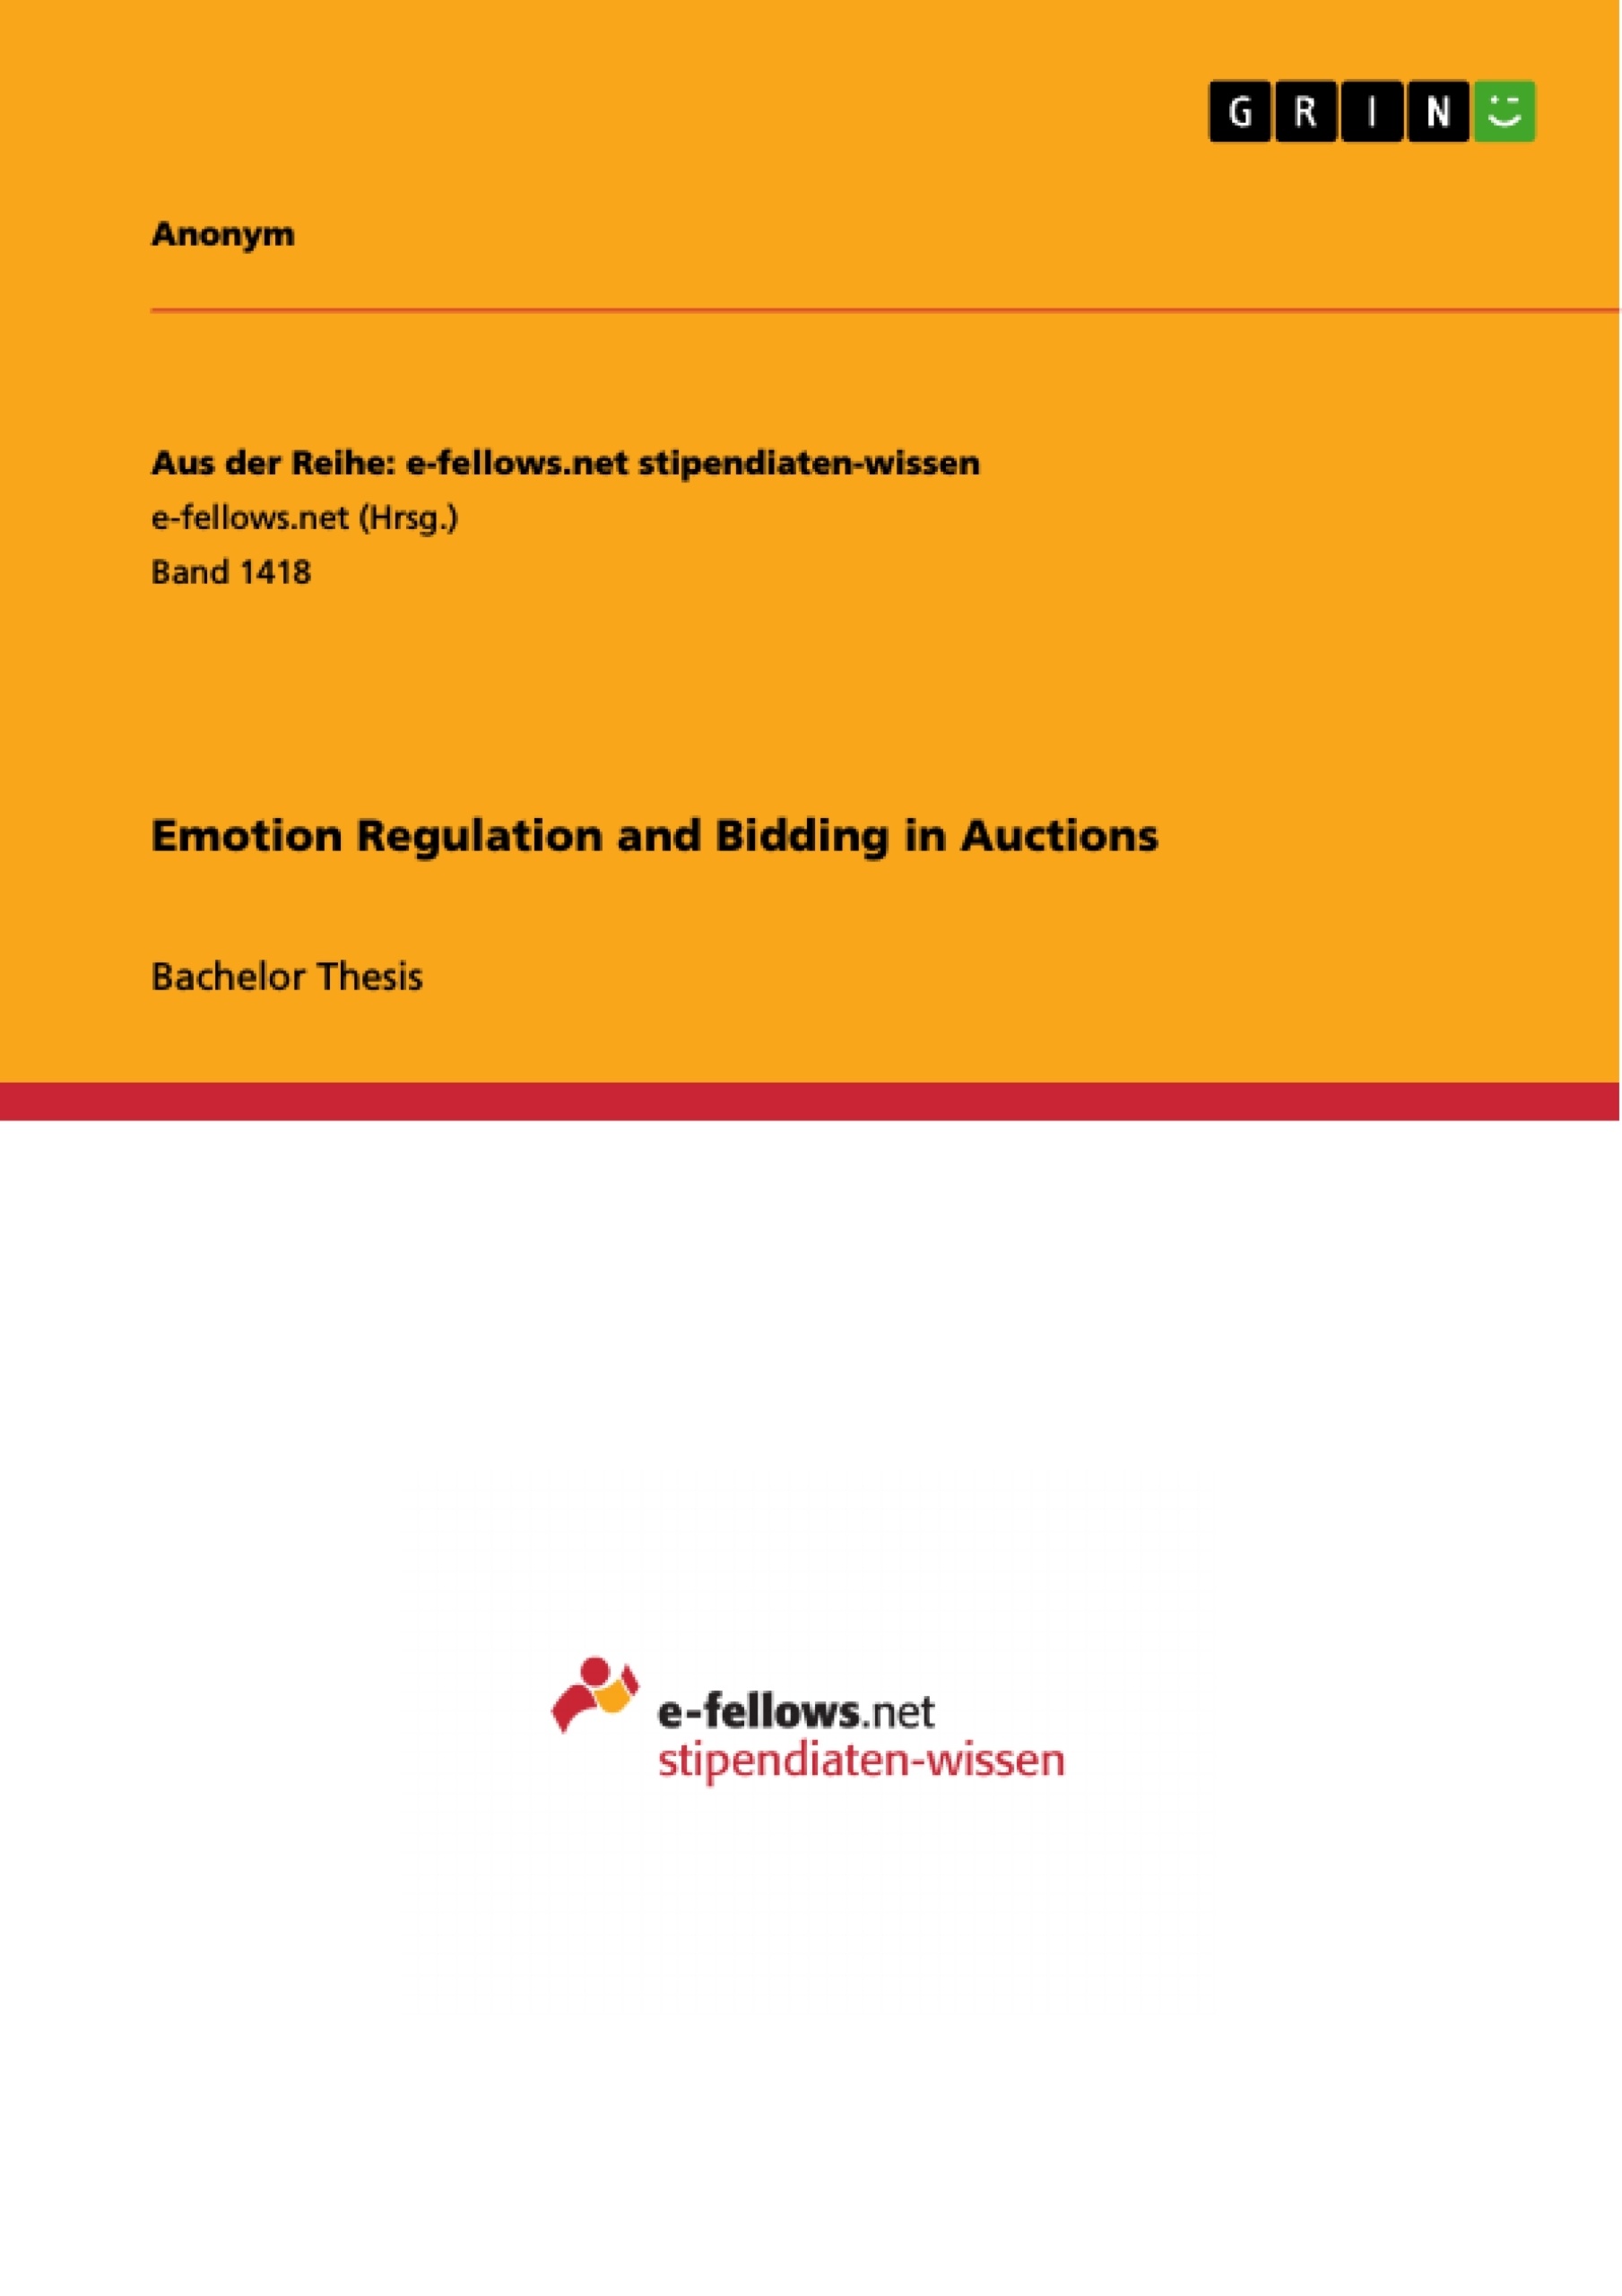 Title: Emotion Regulation and Bidding in Auctions